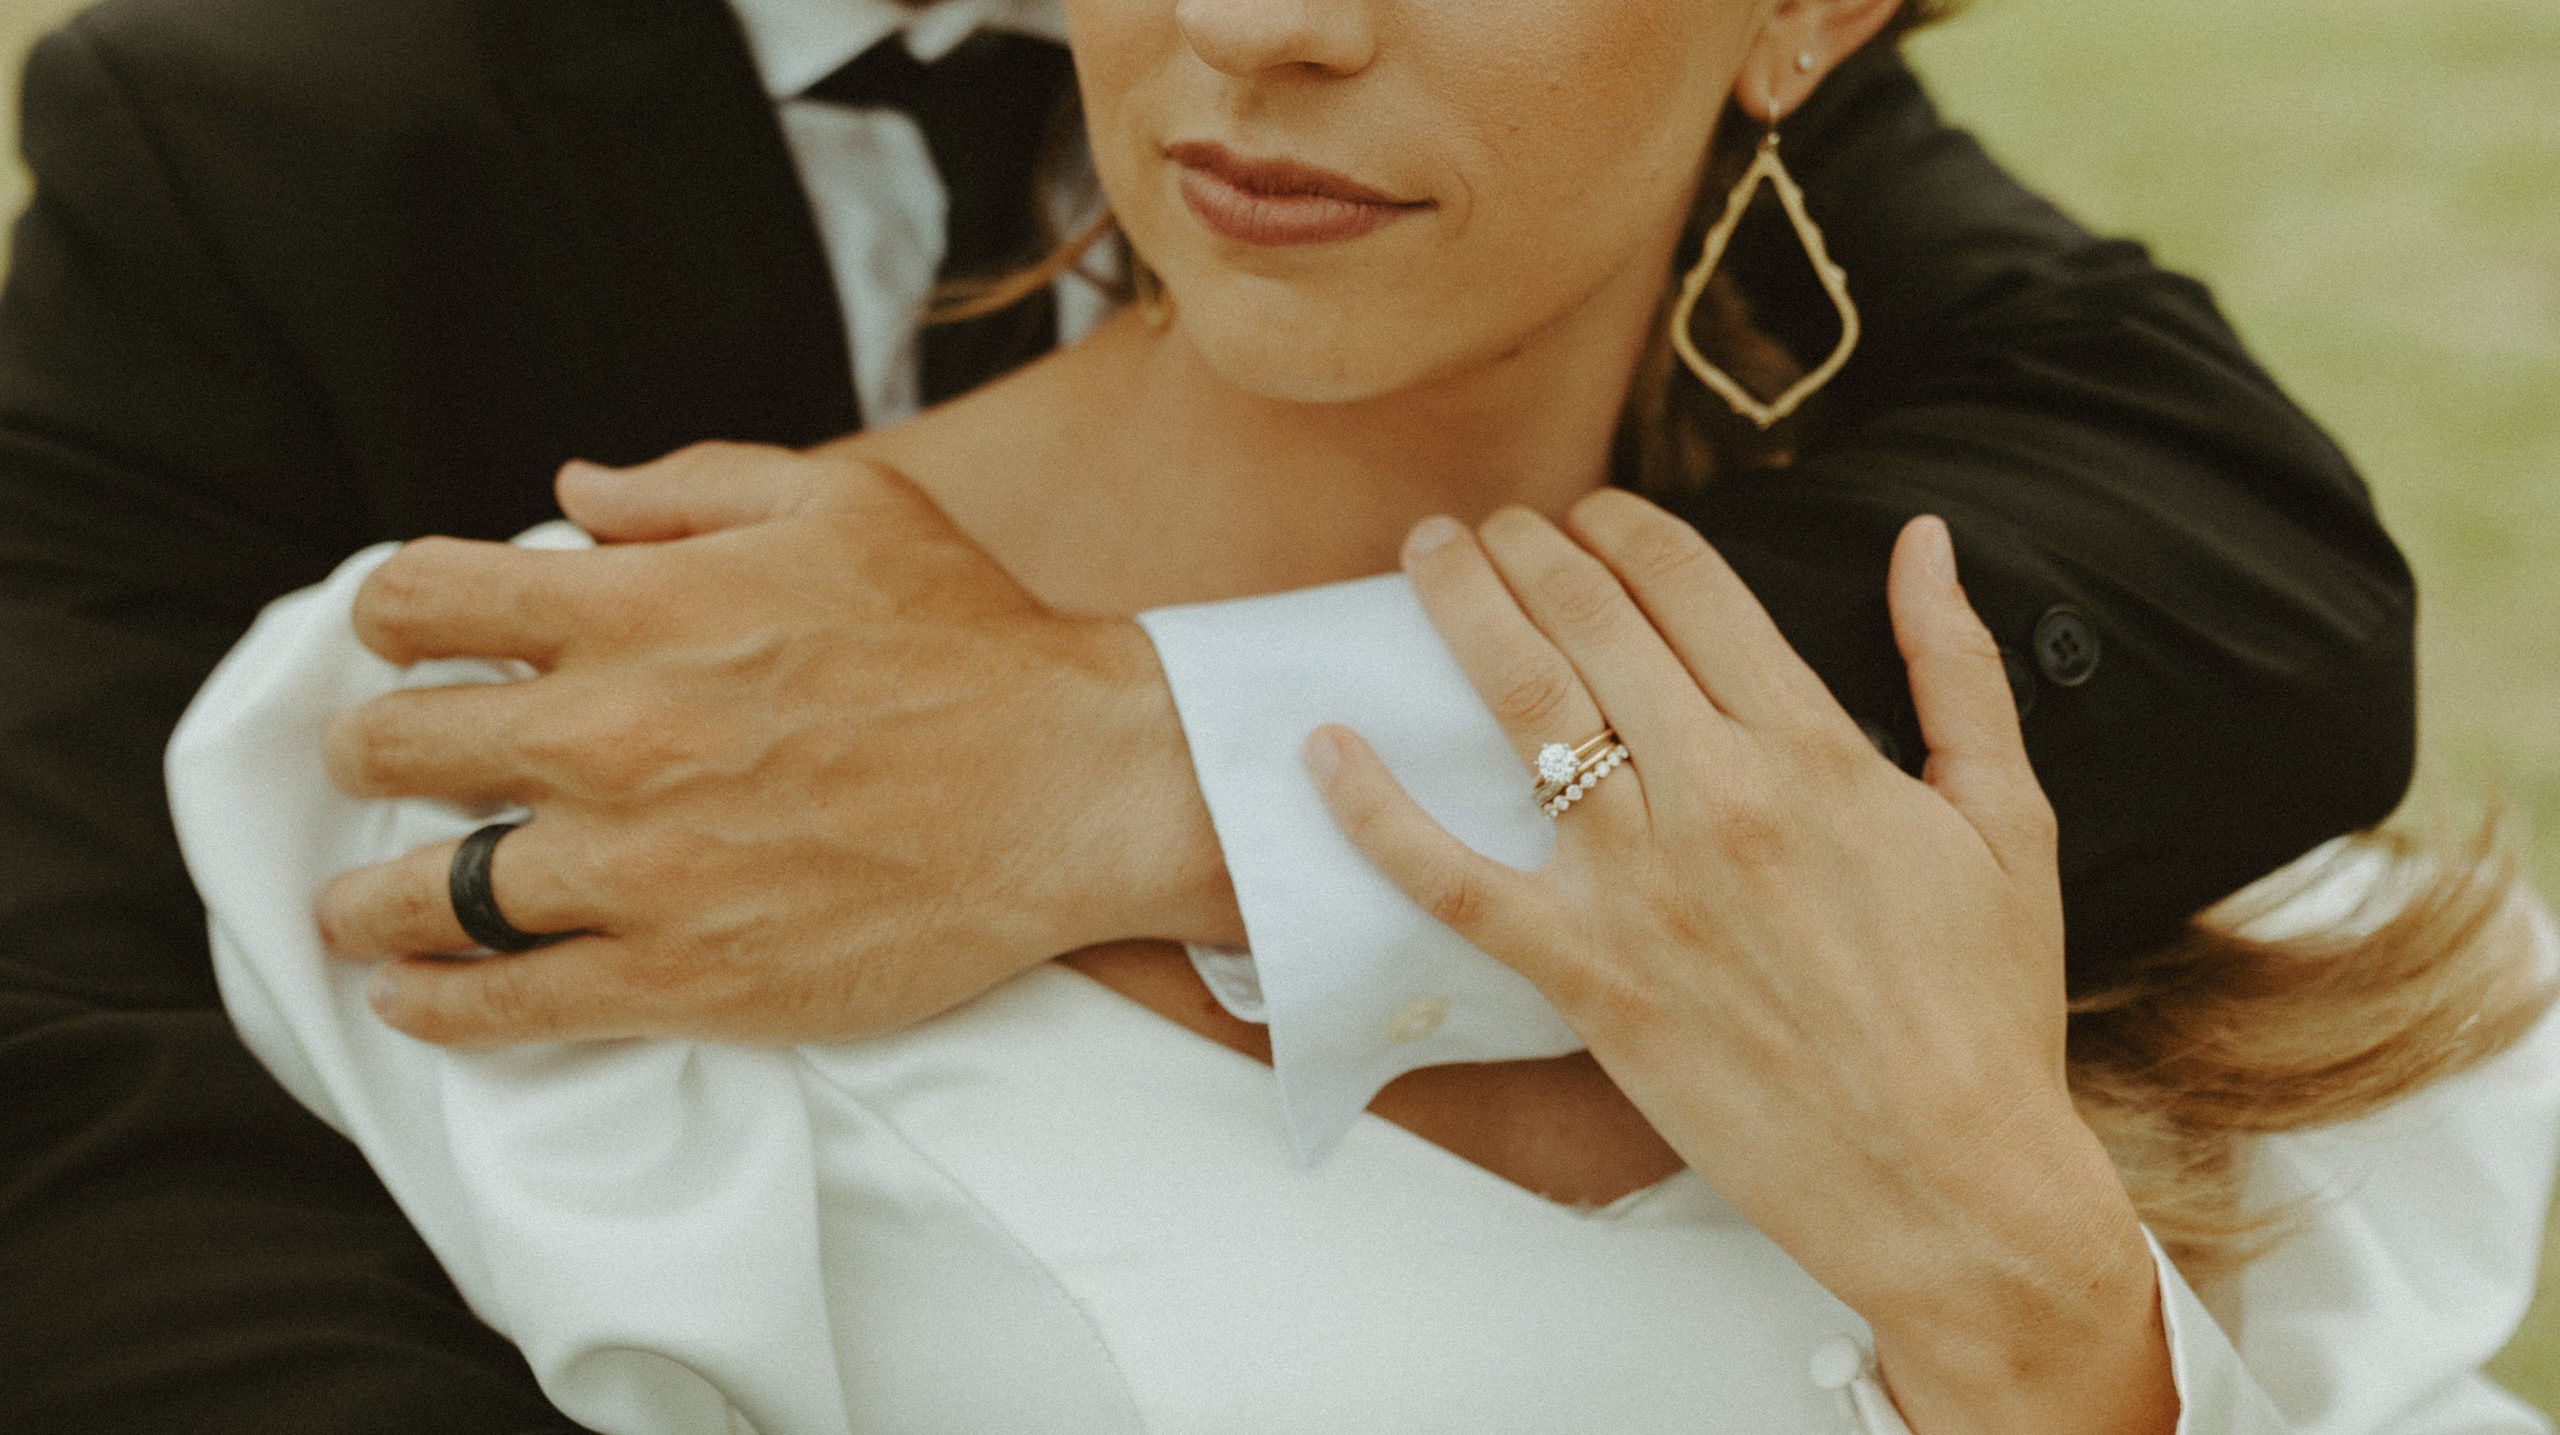 the arms of the couple showing off their wedding rings